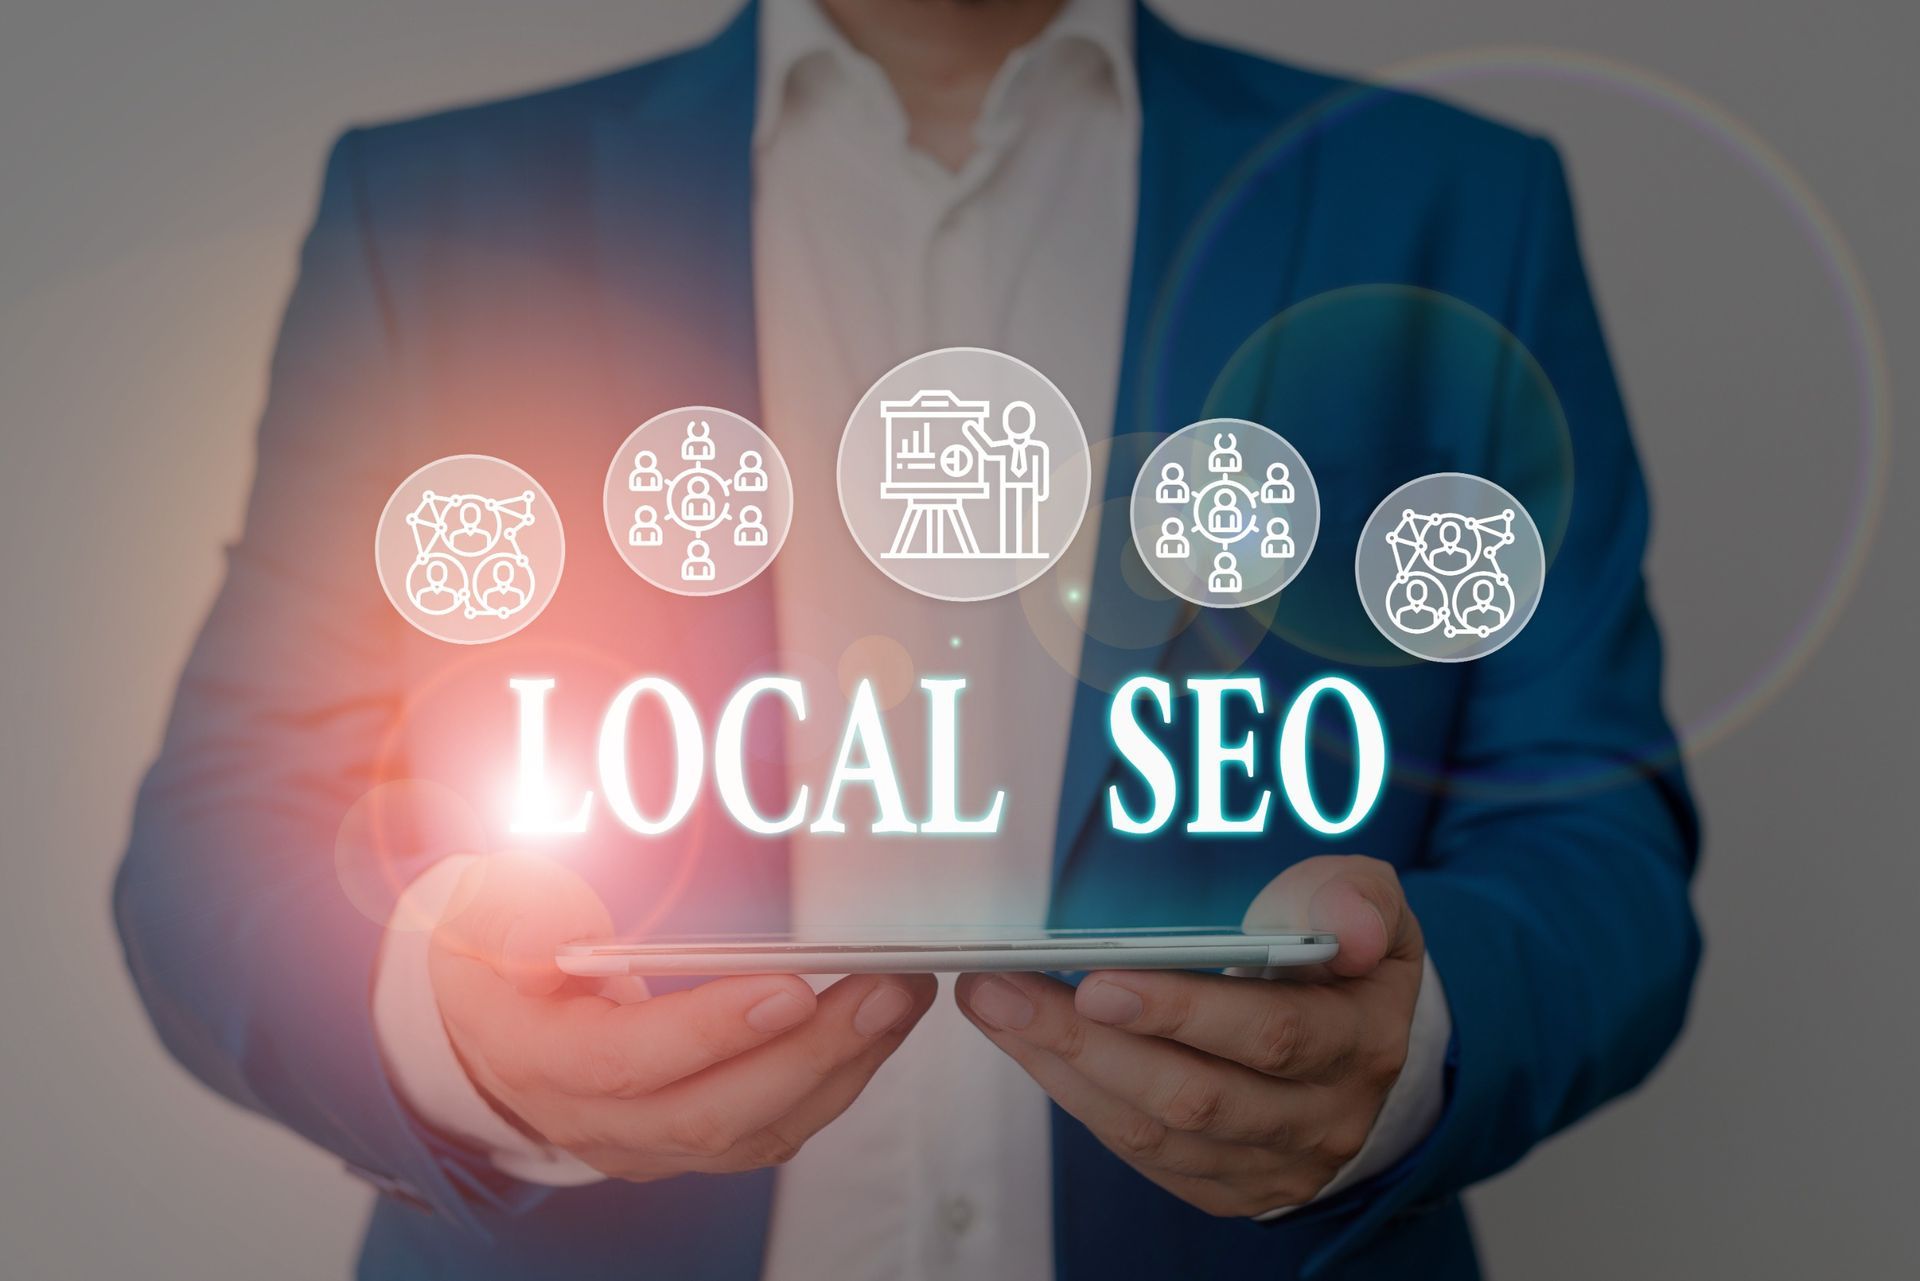 Local SEO: A Blueprint for Small Businesses to Attract Nearby Customers